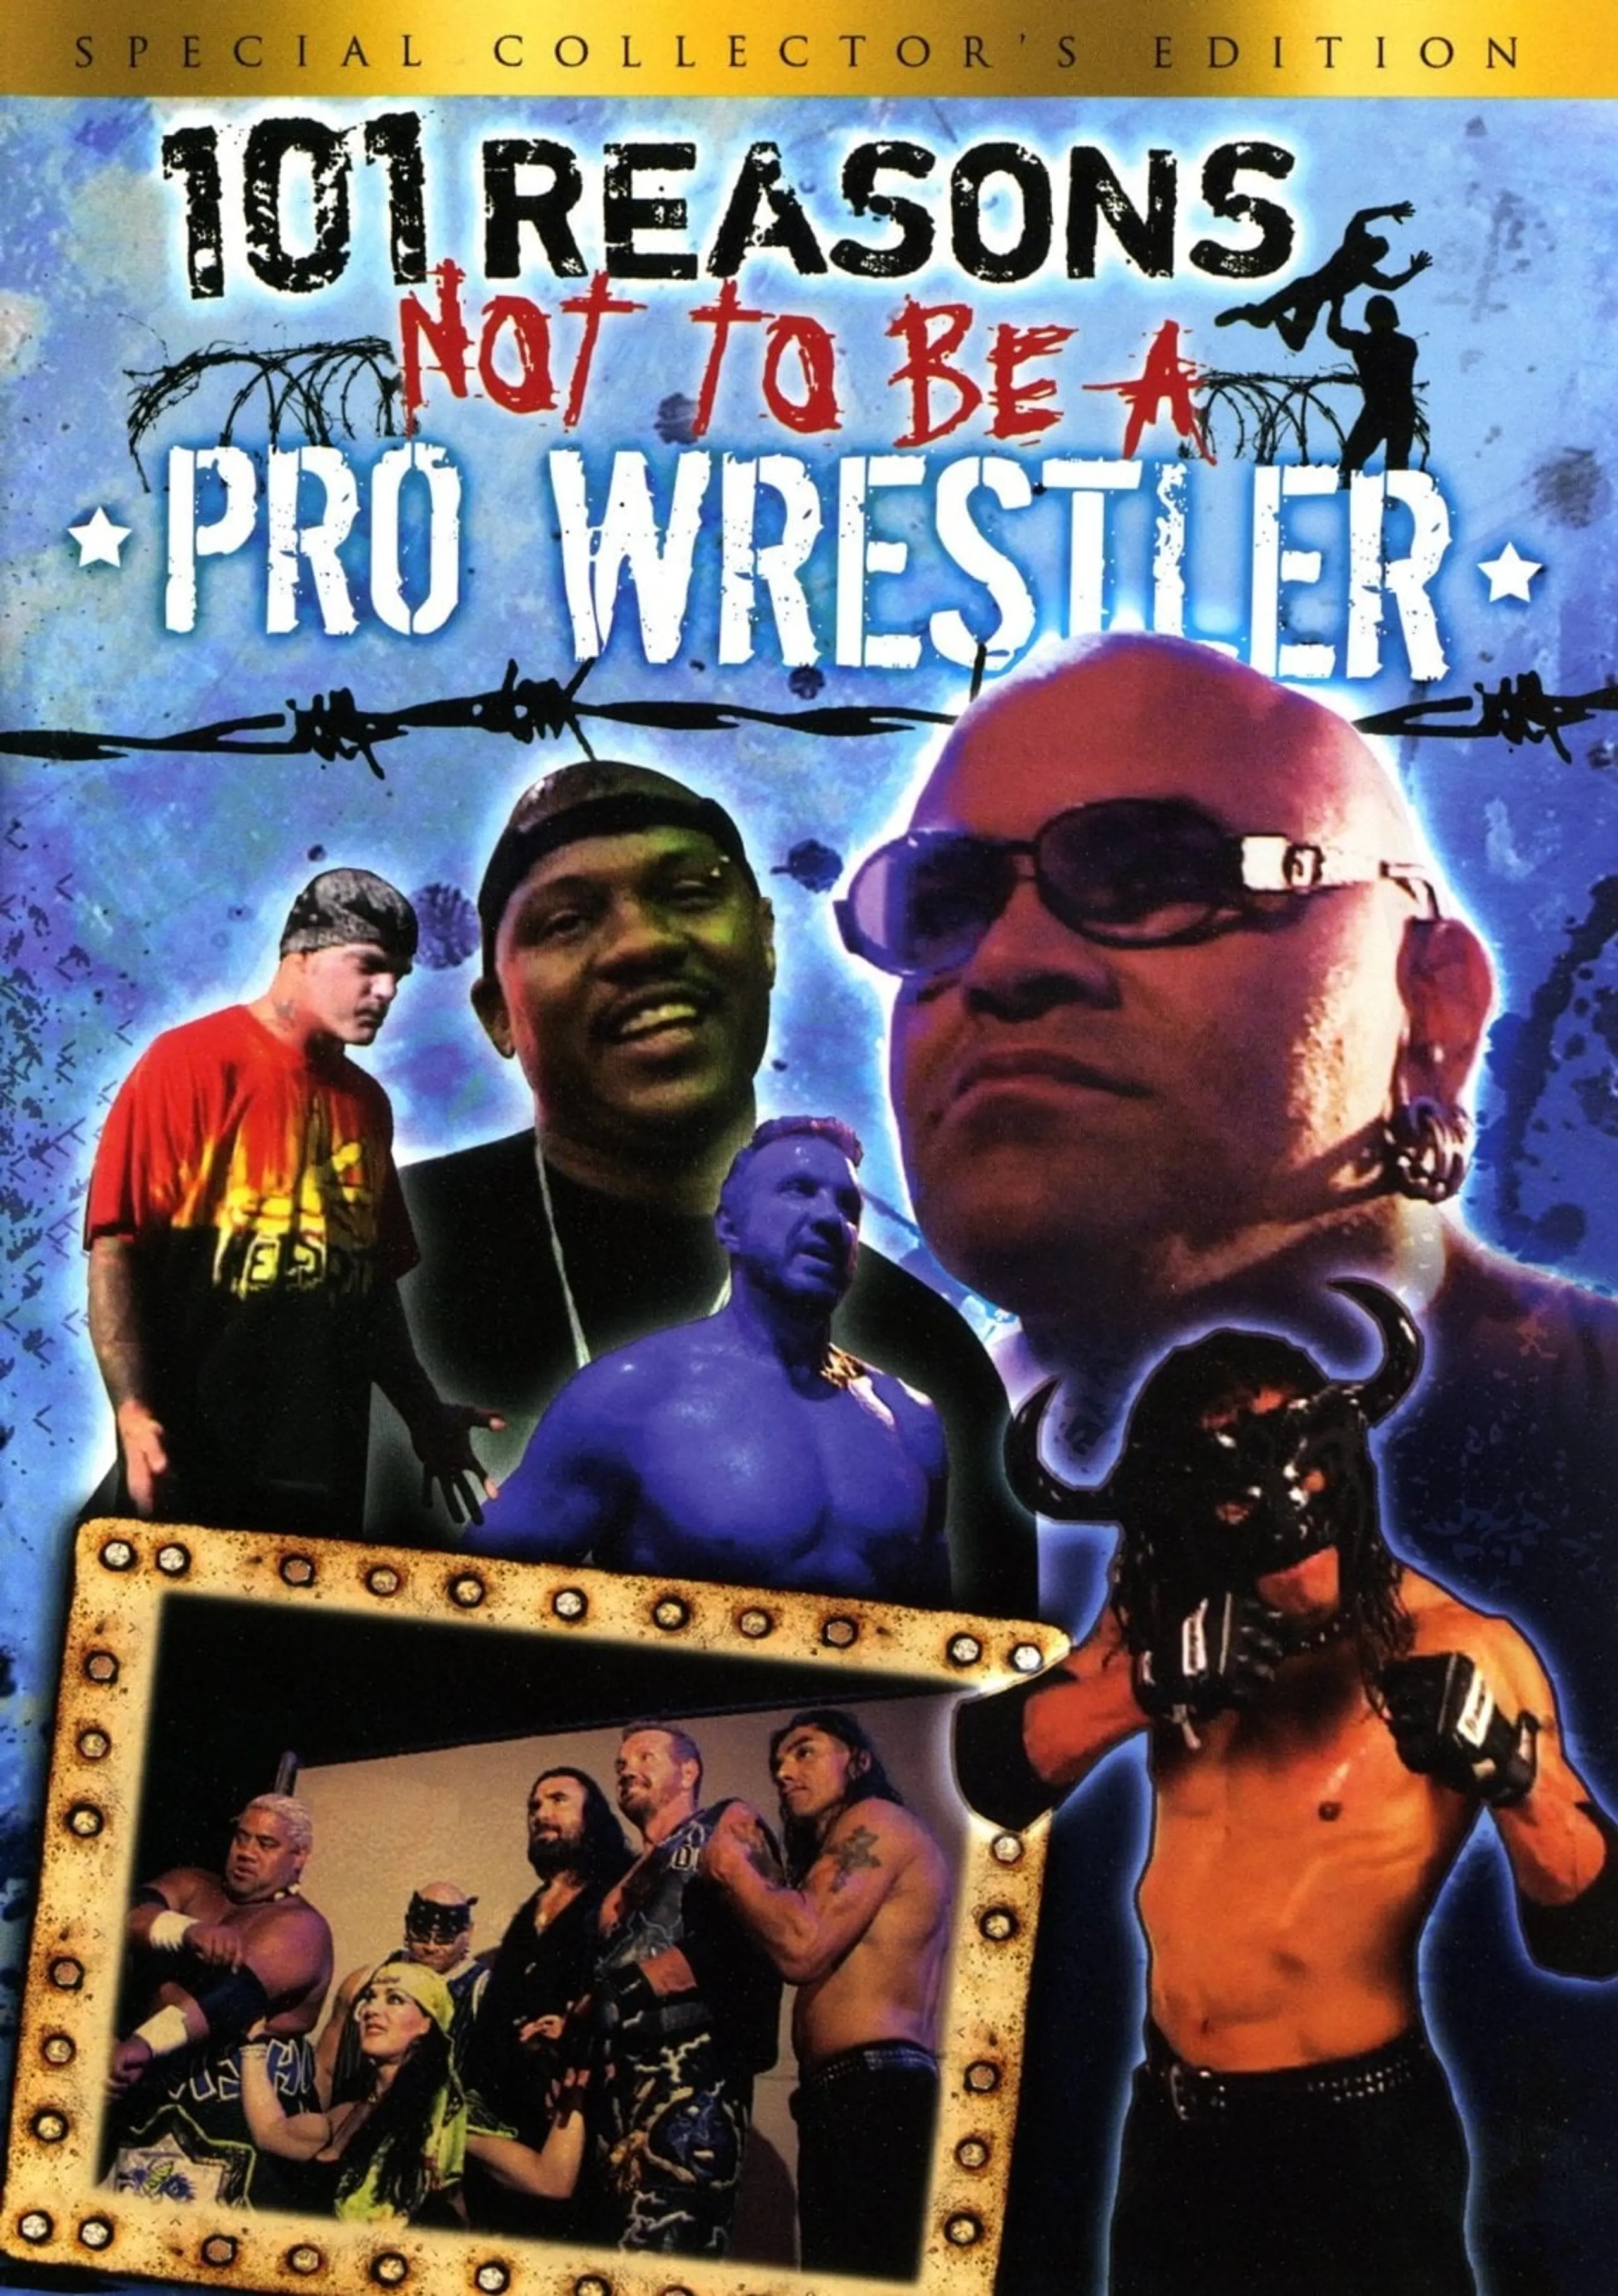 101 Reasons Not To Be A Pro Wrestler